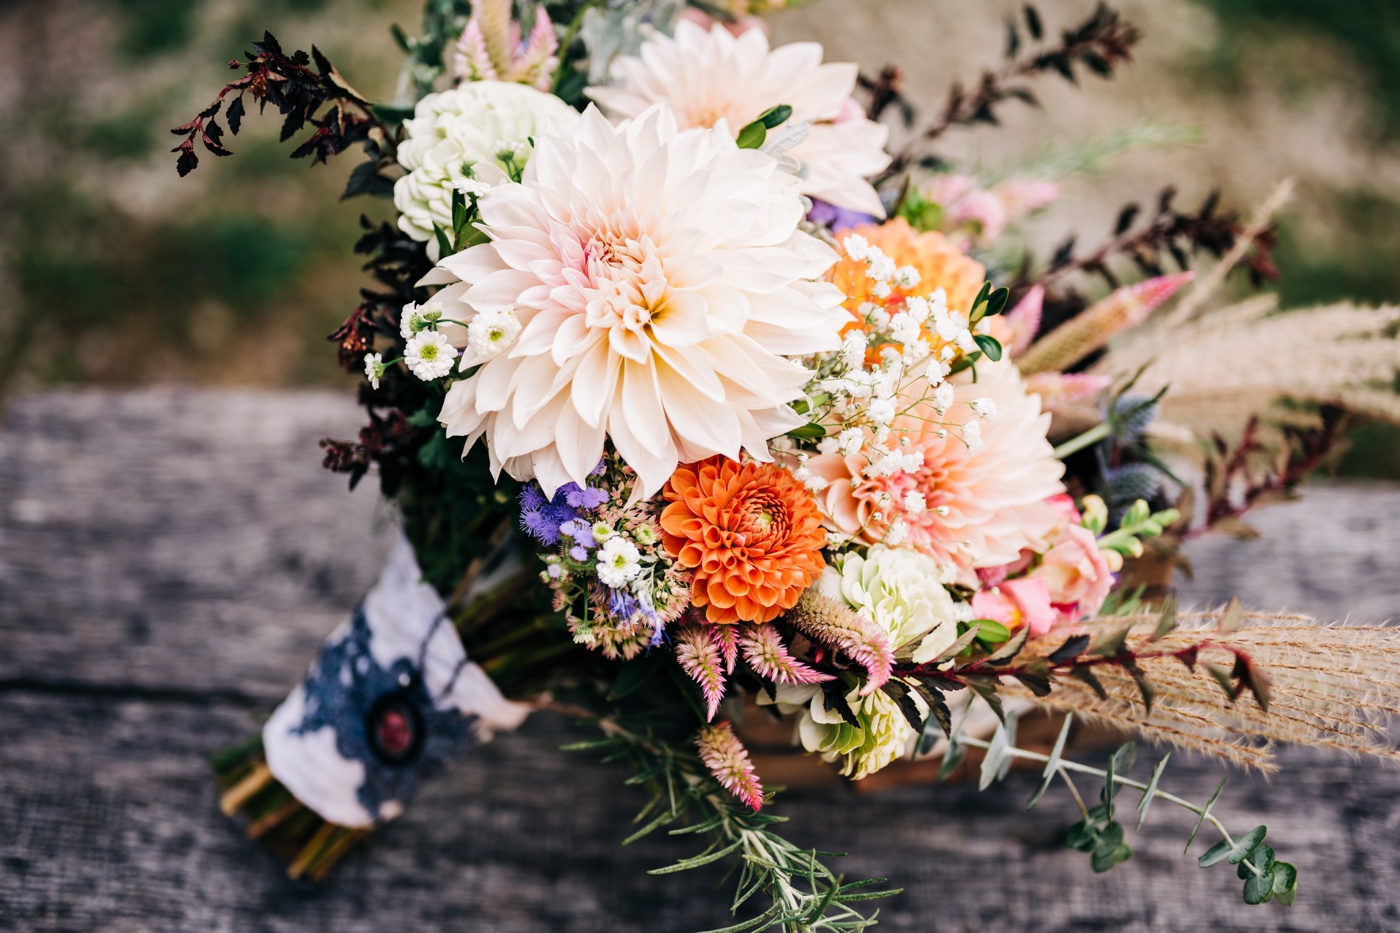 handtied bridal bouquet with pink and orange flowers